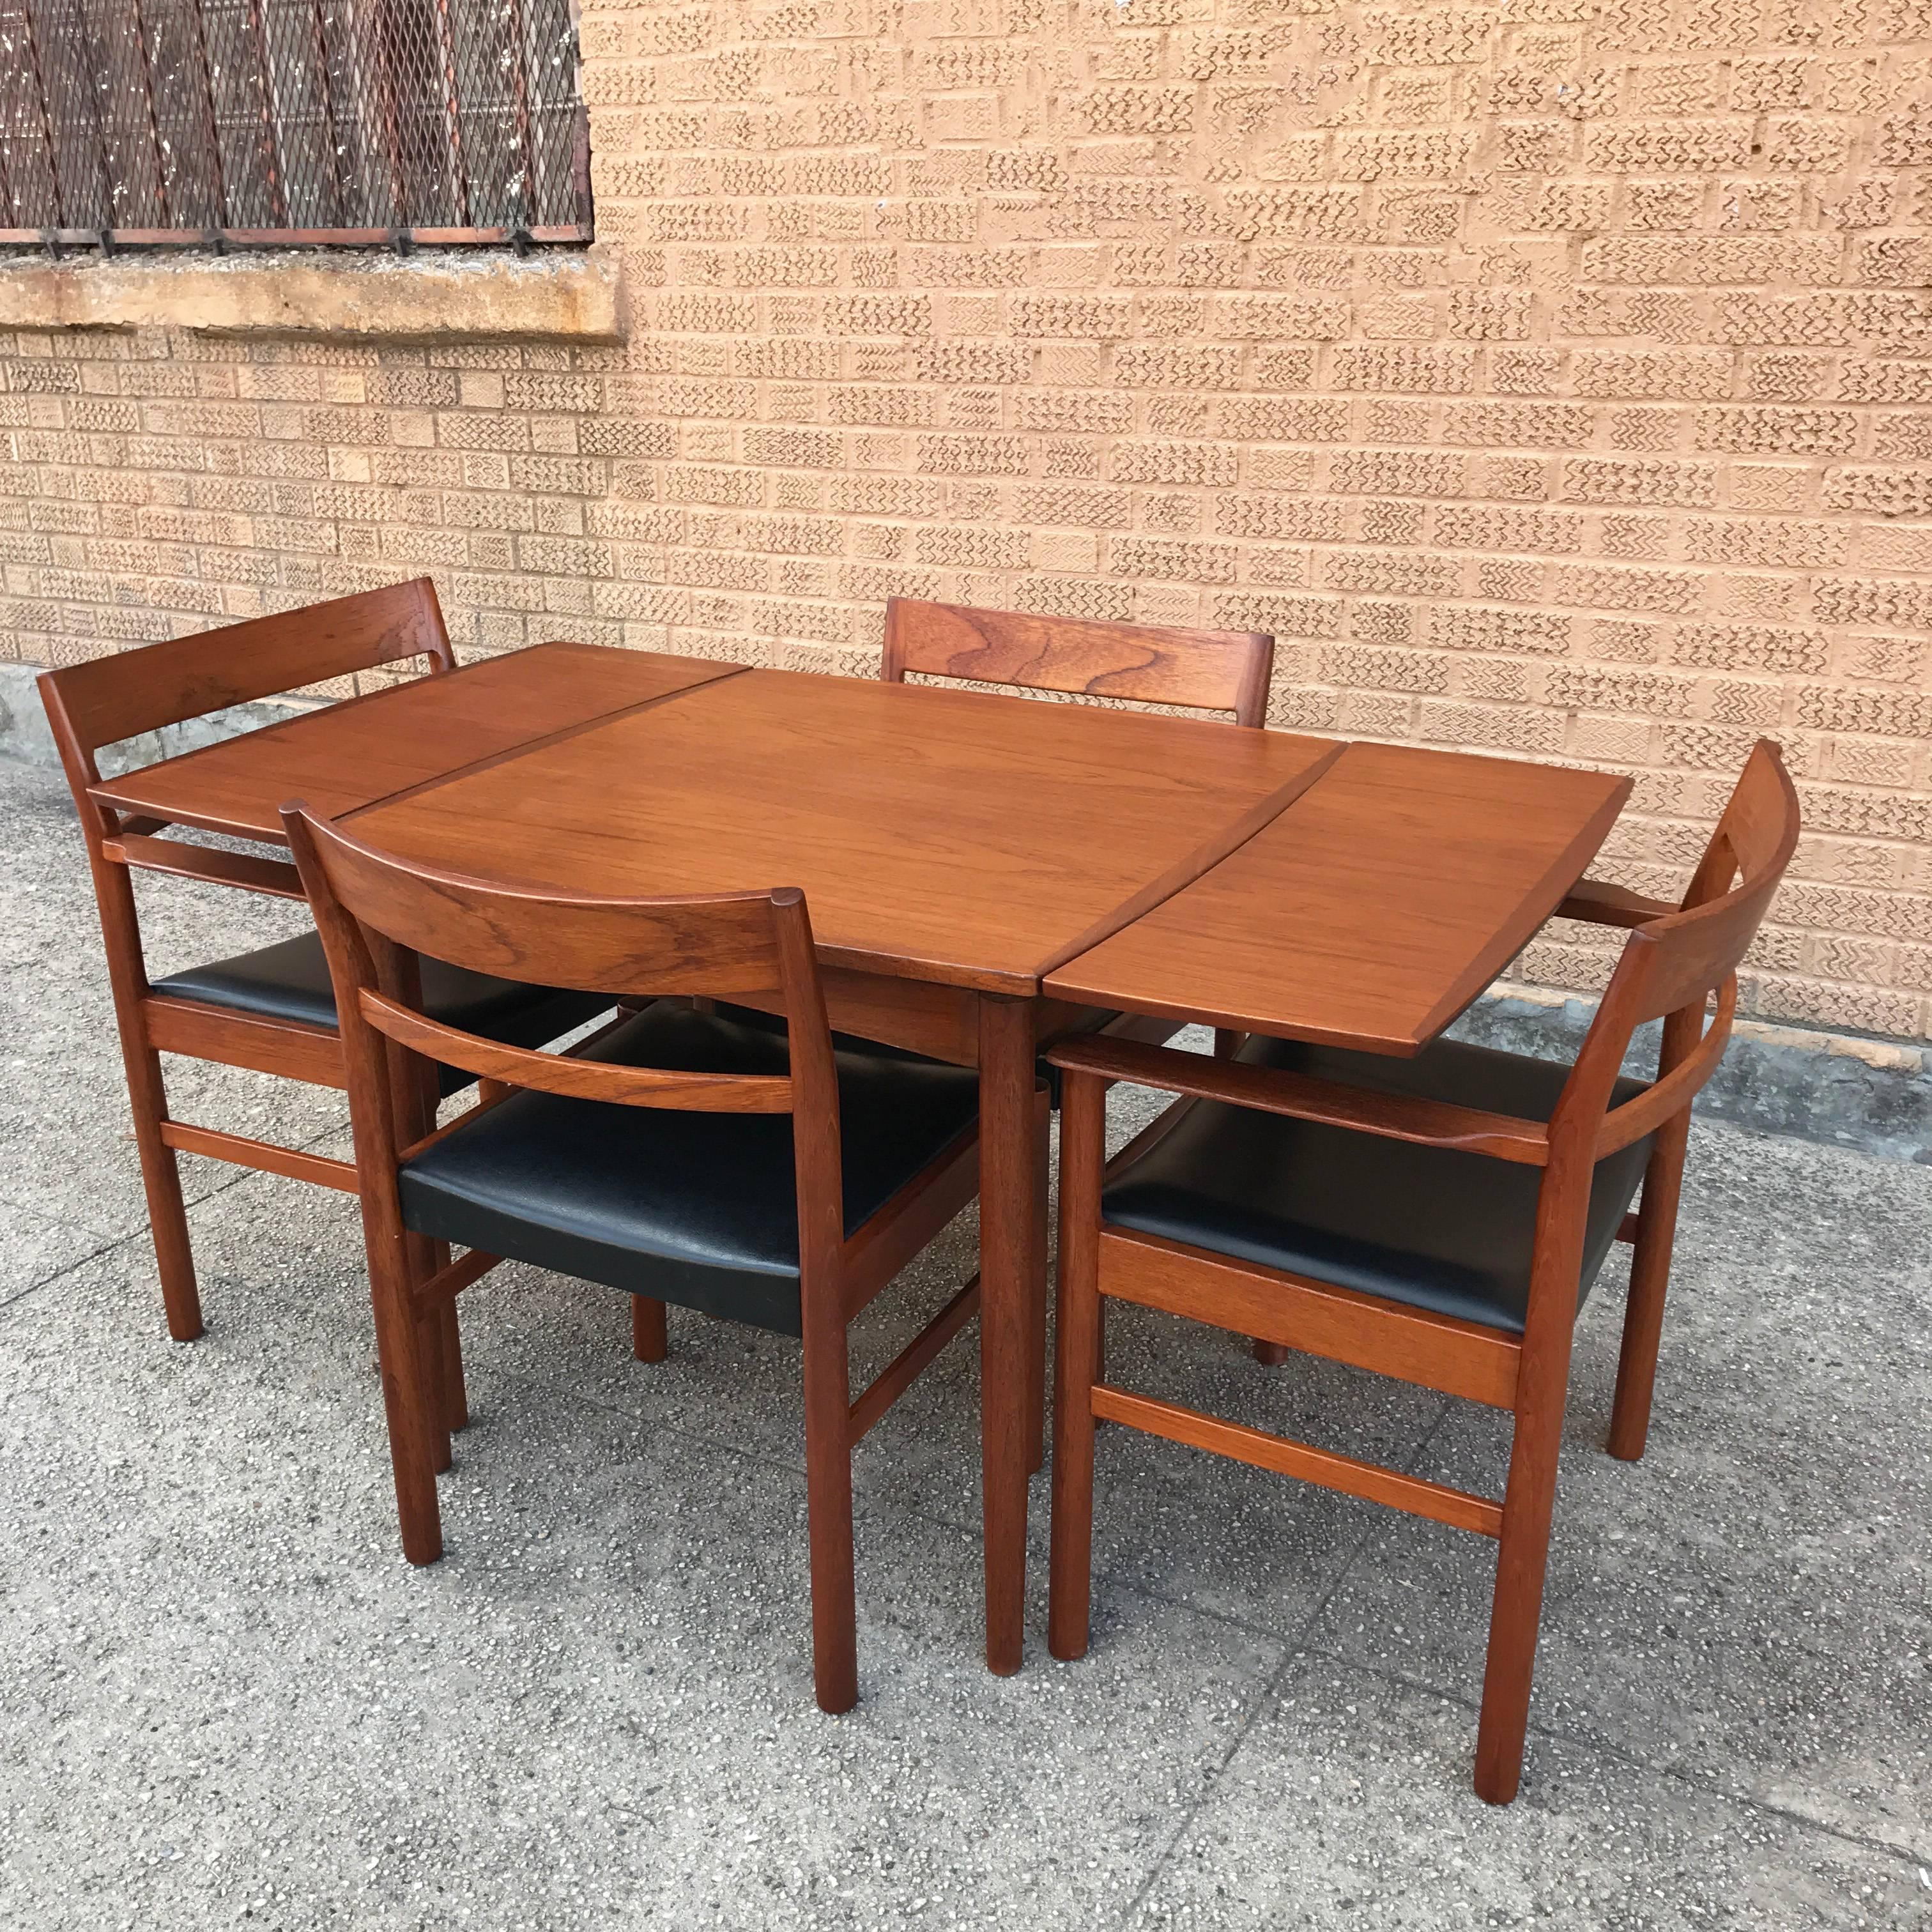 Set of four, newly restored, Danish modern, teak dining chairs by Kurt Ostervig are comprised of two captain armchairs and two side chairs. The black vinyl seats are original.

Side chairs measure: 20 W X 17 D X 31 HT, seat height: 17.